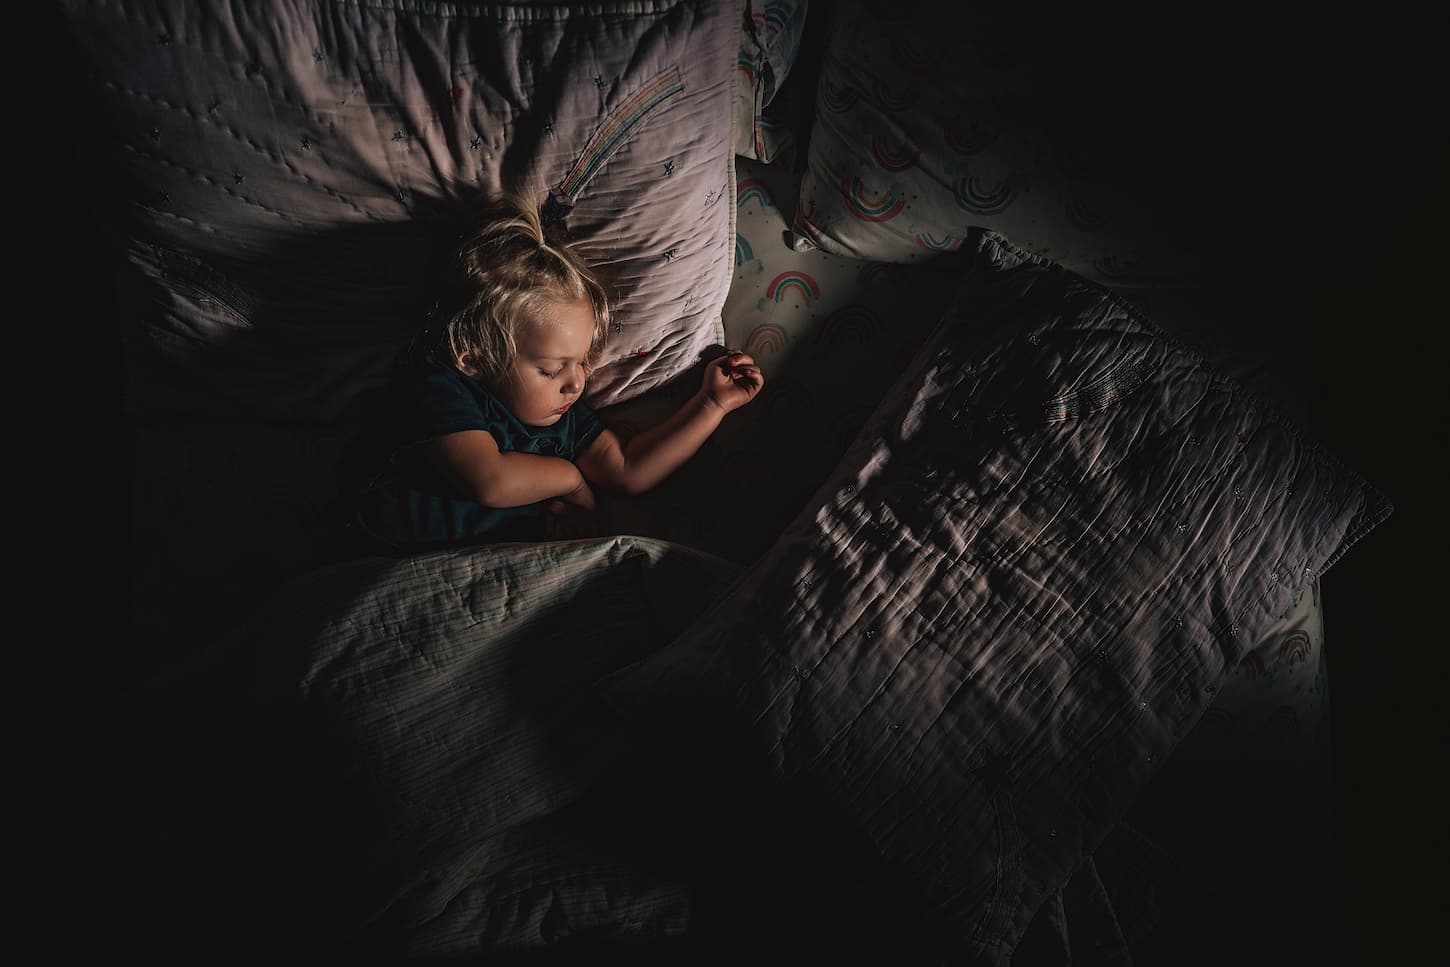 An image of a child sleeping in a dark room.